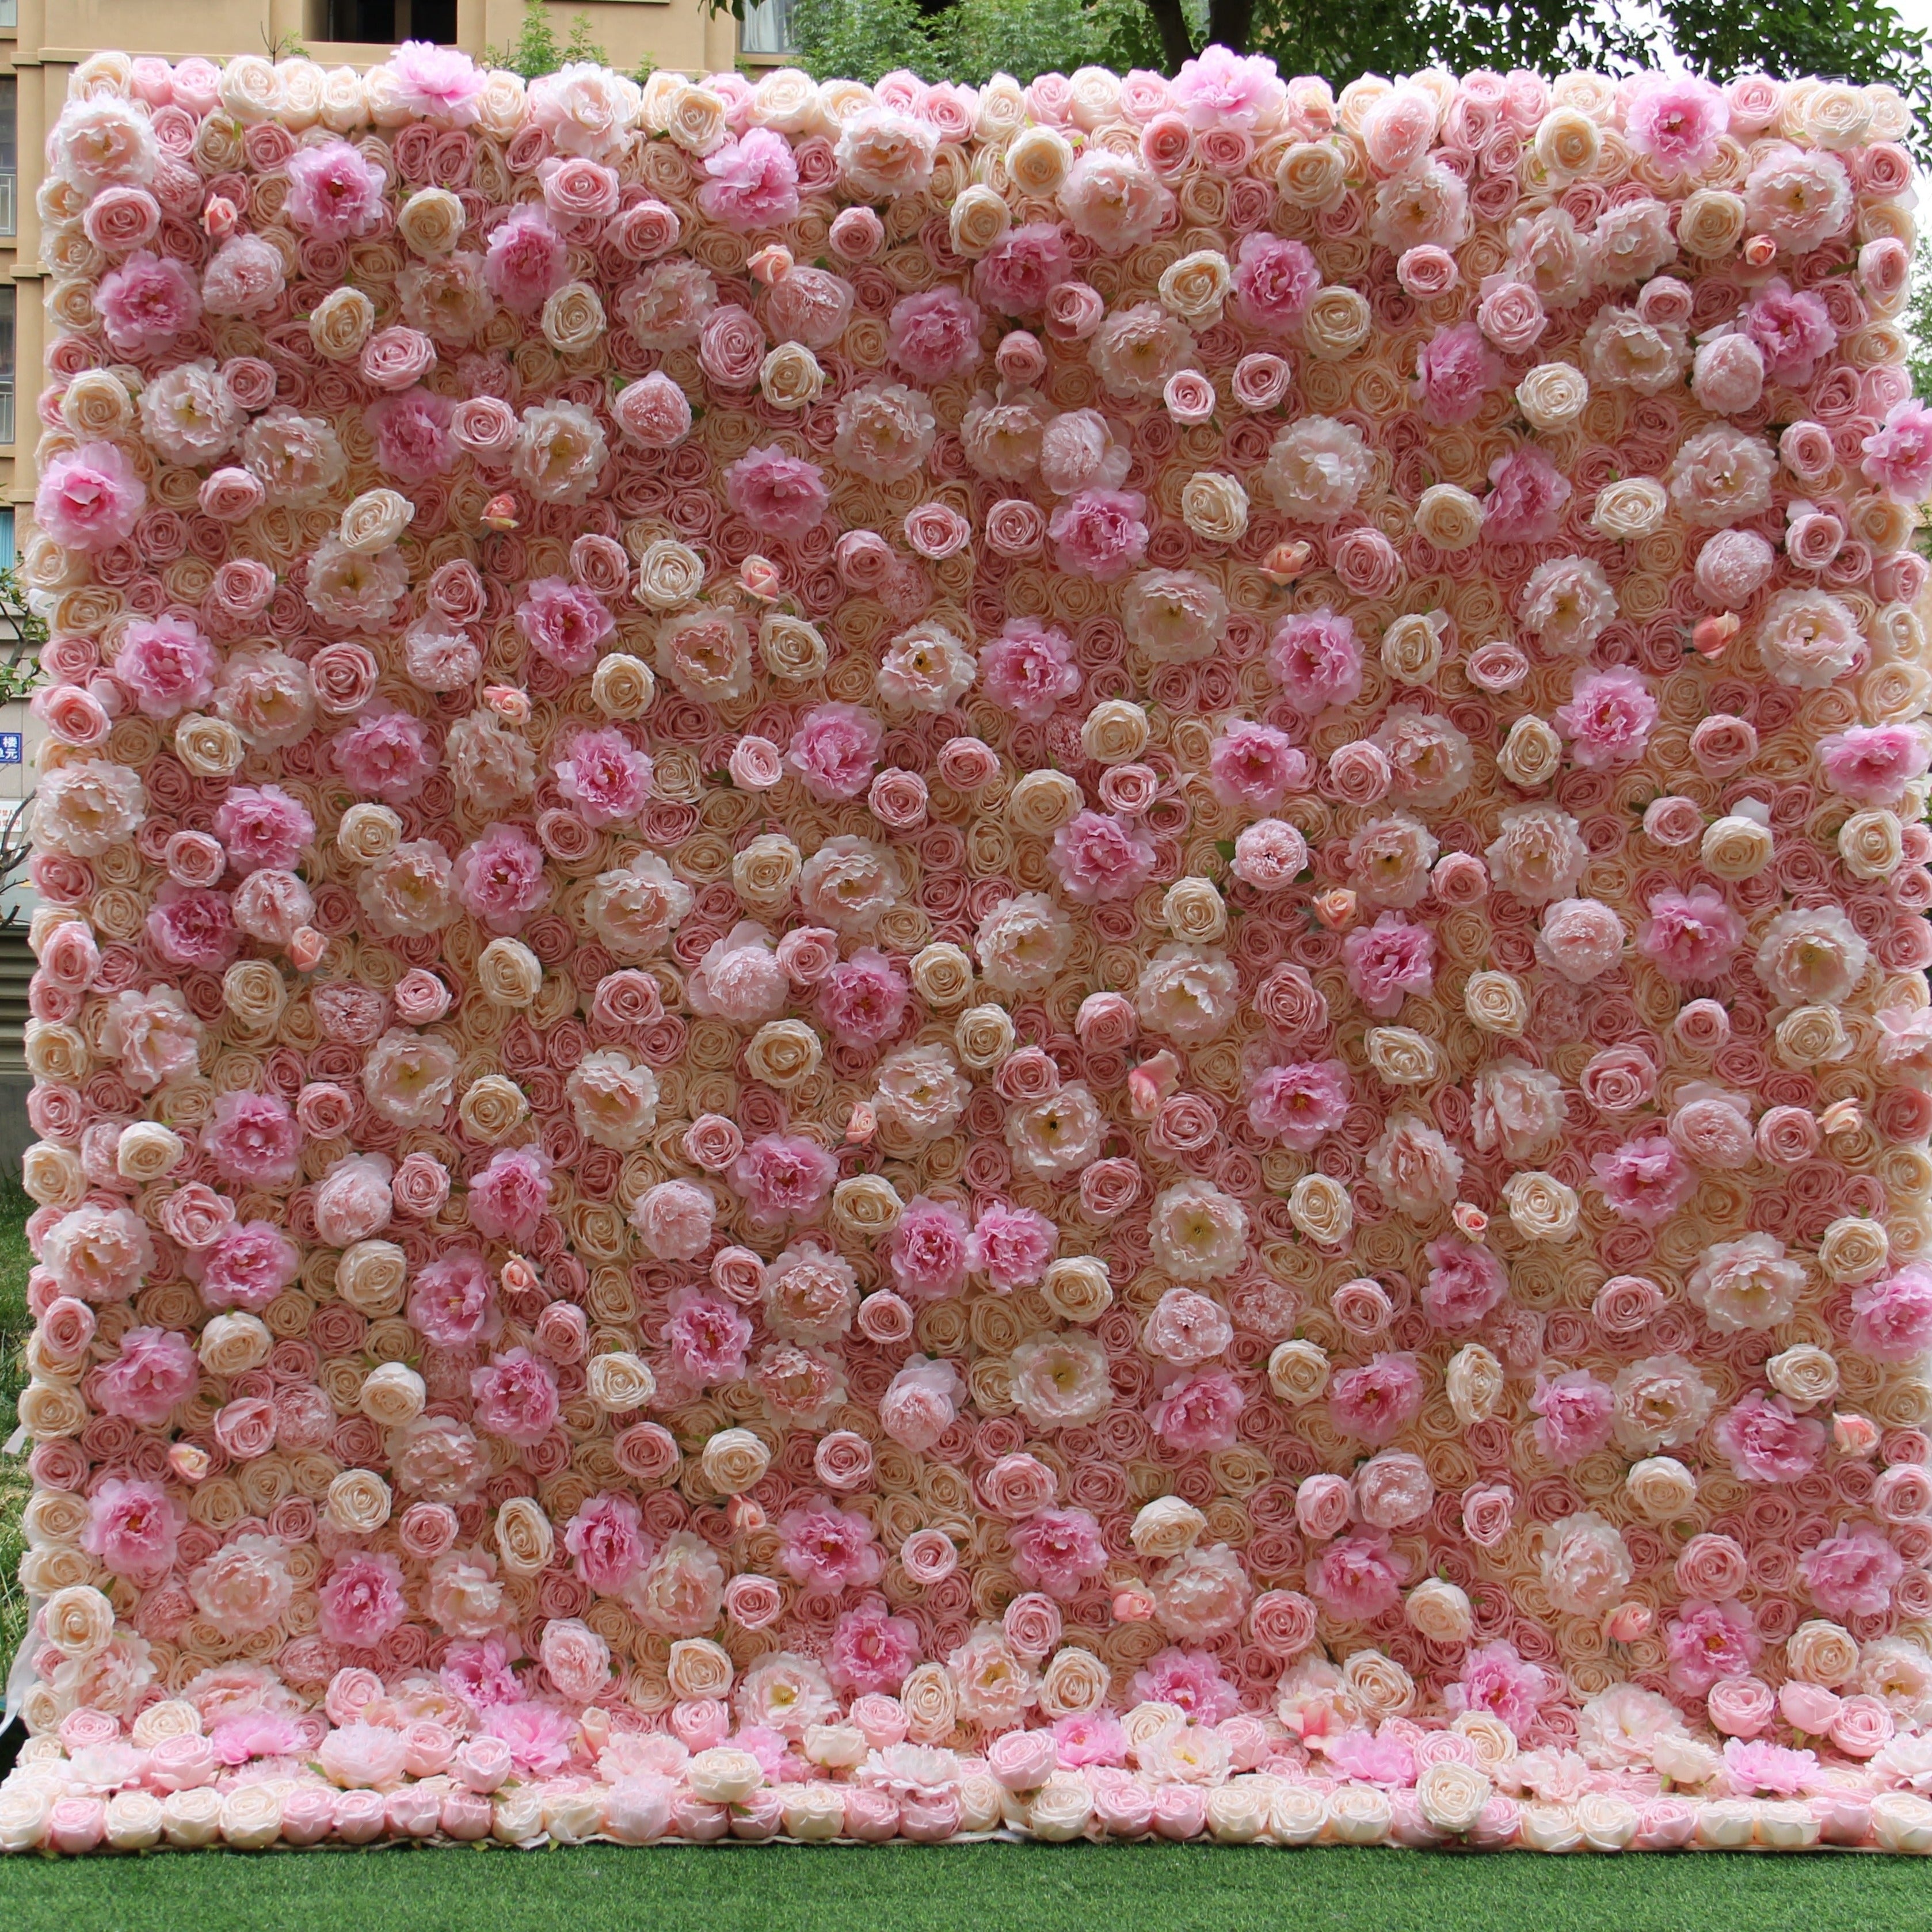 Flower Wall Pink Champagne Peony Fabric Rolling Up Curtain Floral Backdrop Wedding Party Proposal Decor